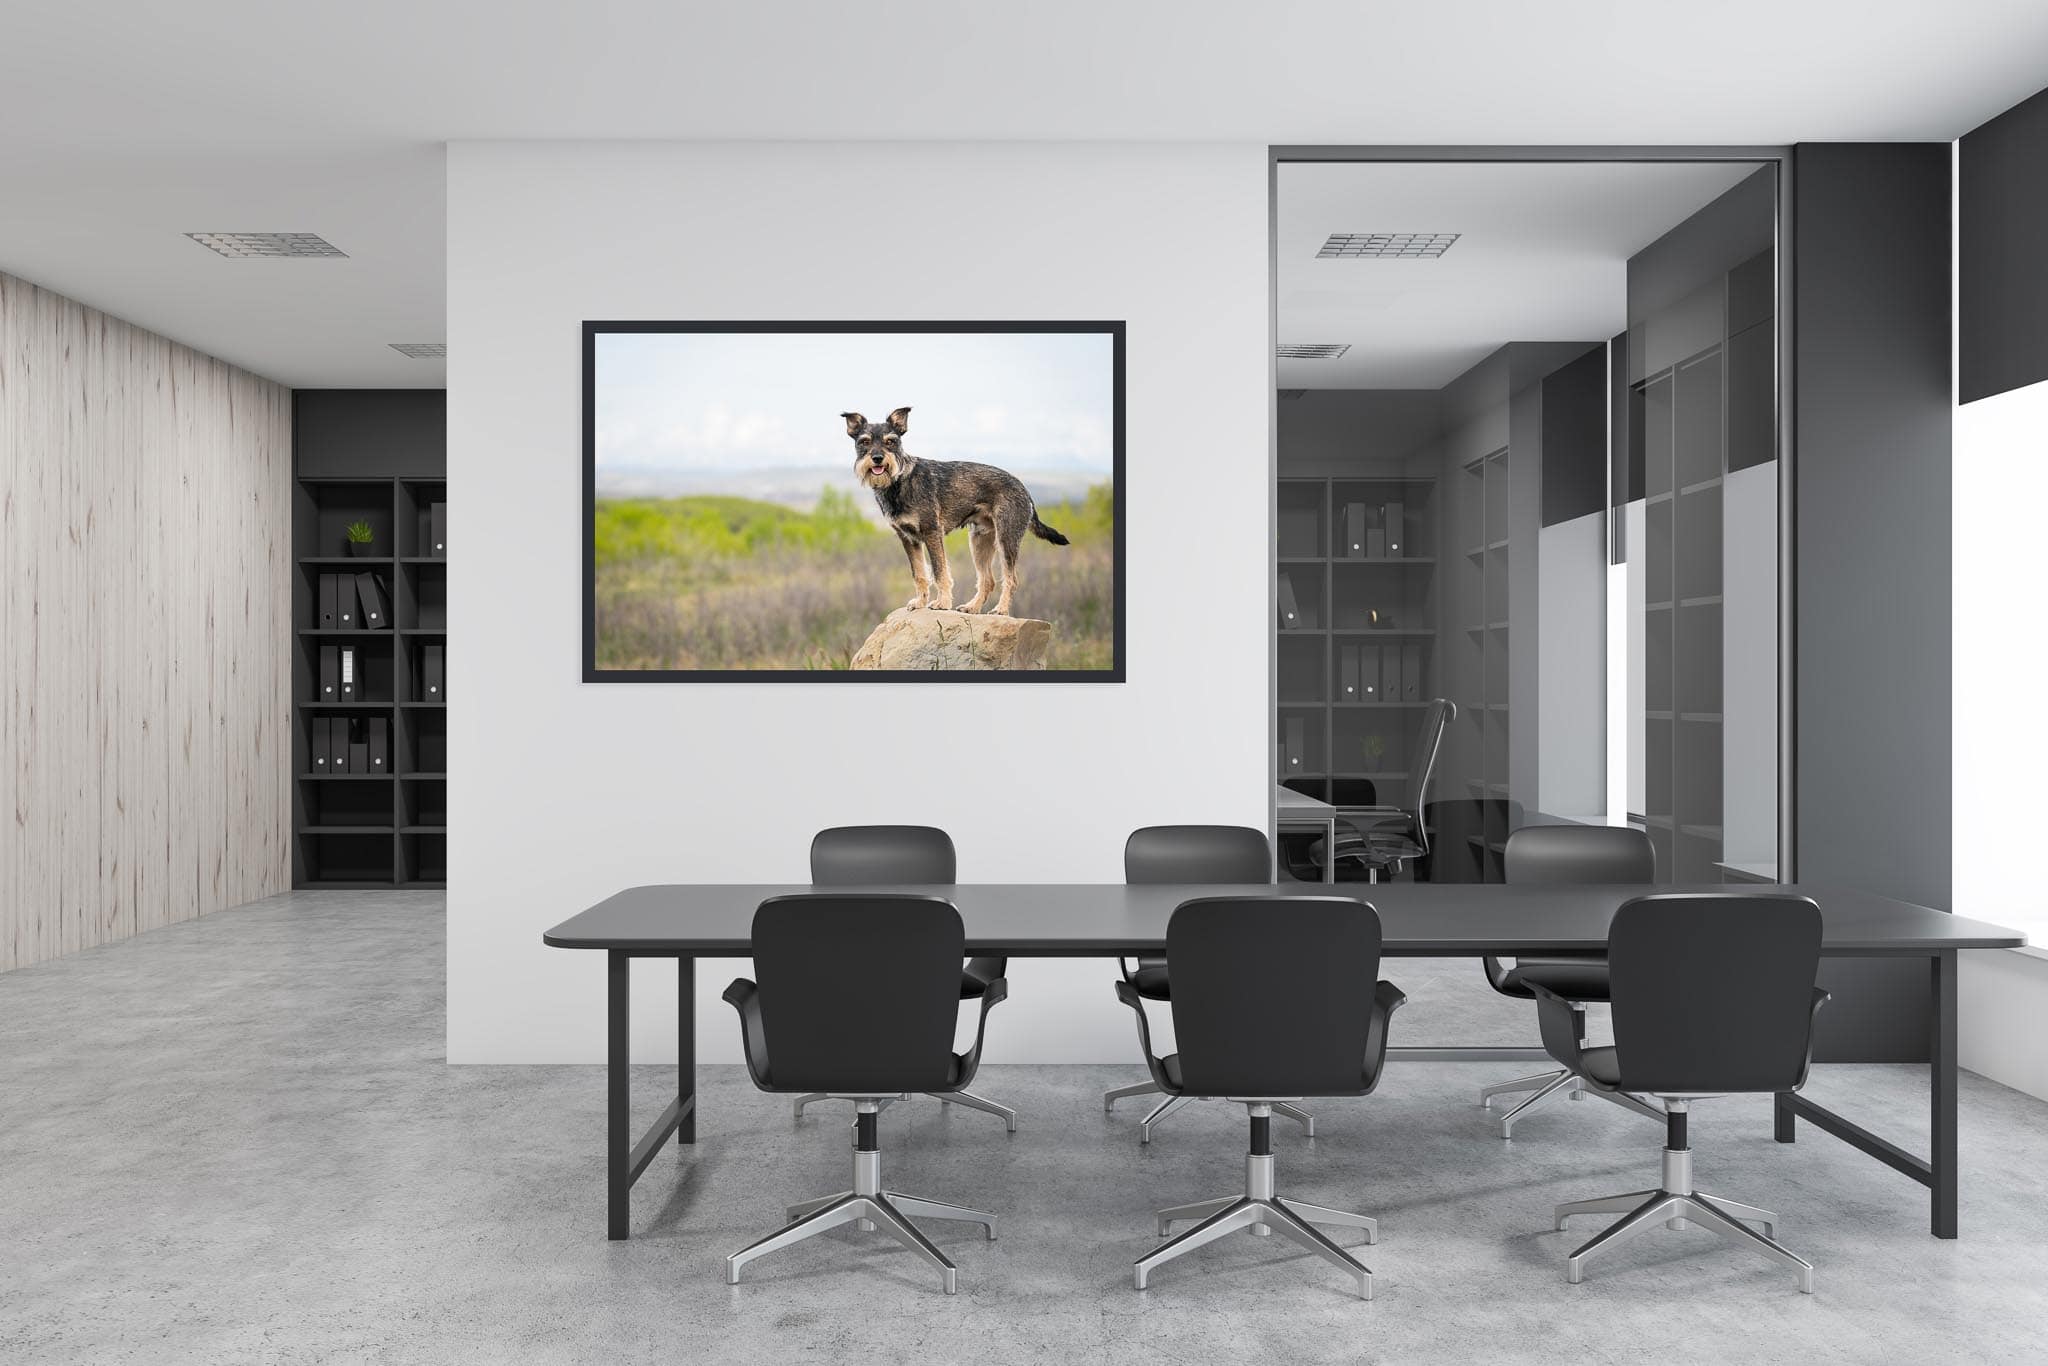 Portrait of a dog hanging on the wall of an office boardroom in Alberta